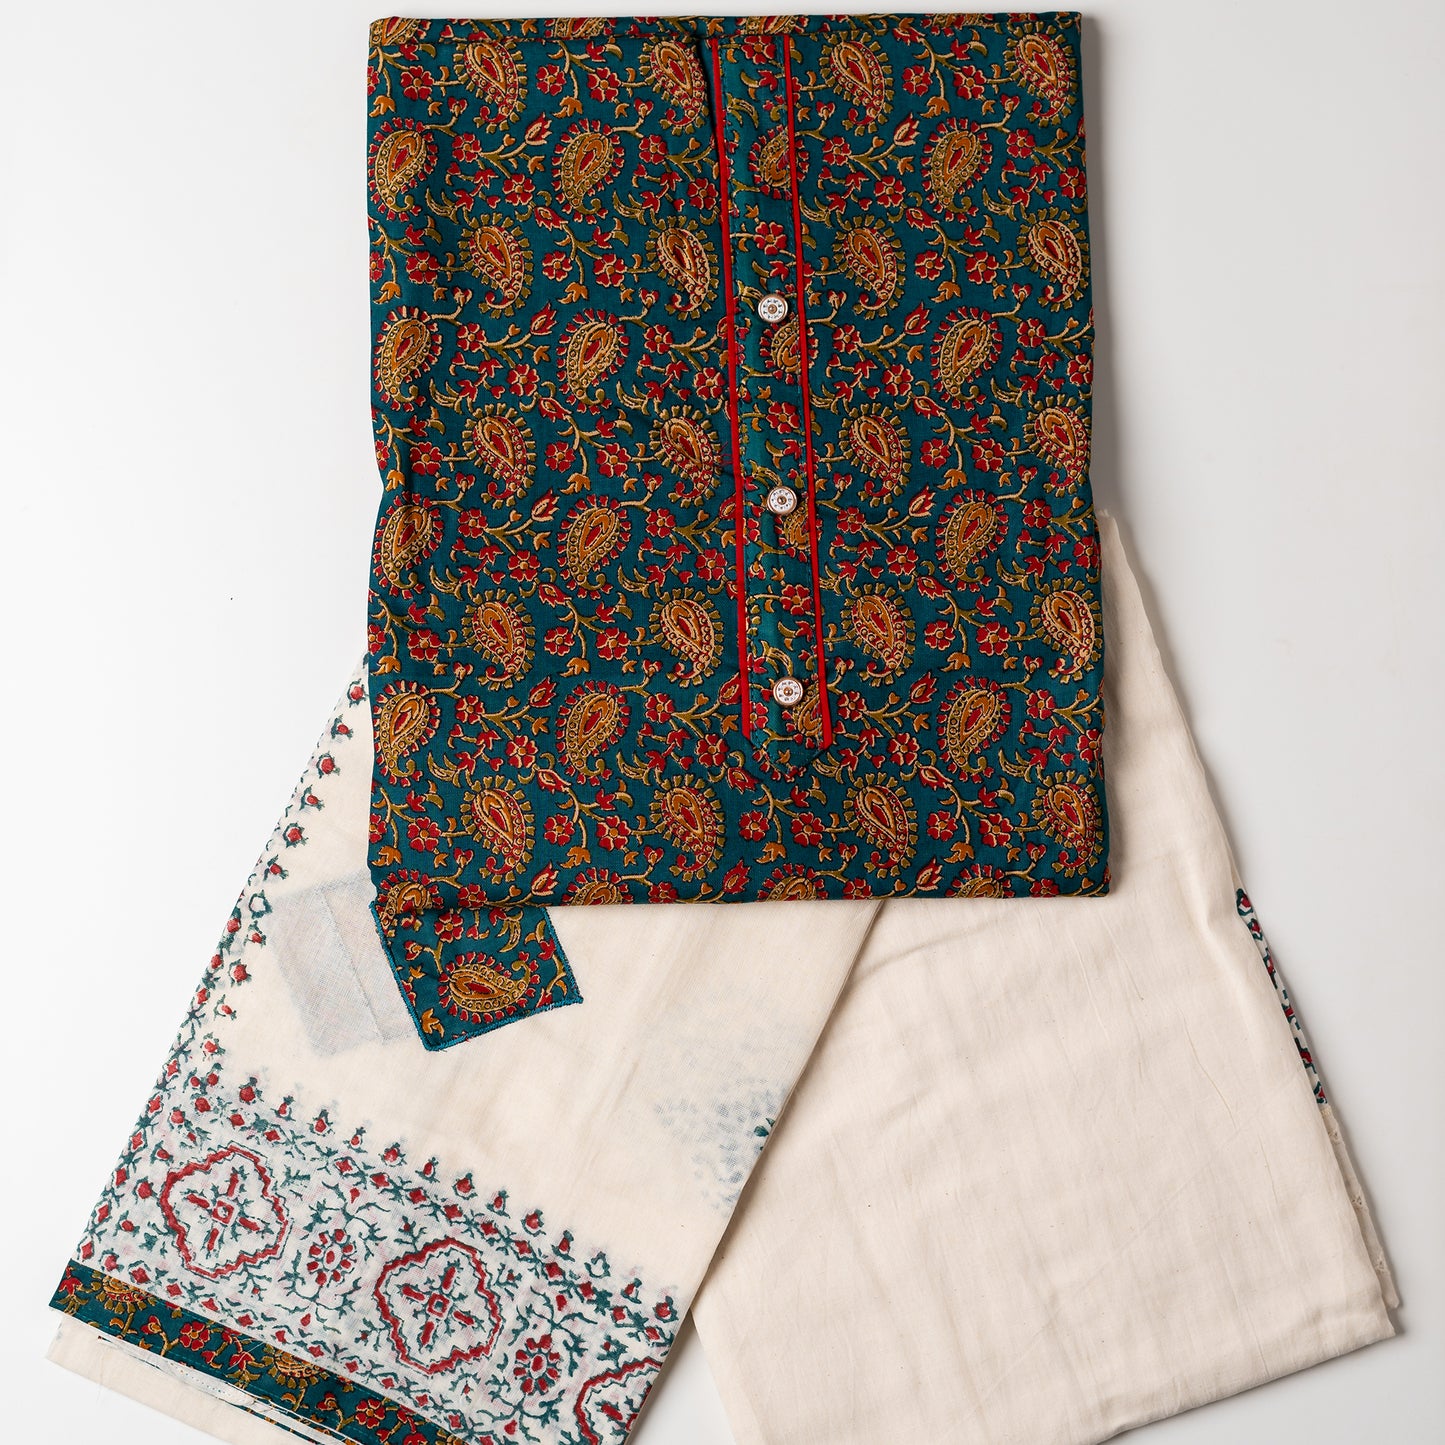 cotton dress material for women, Cotton top with multi color print design, buttons and contrast color piping in yoke, cream color cotton bottom with hakoba design at the edges and print. Cotton dupatta with matching color prints and cut works